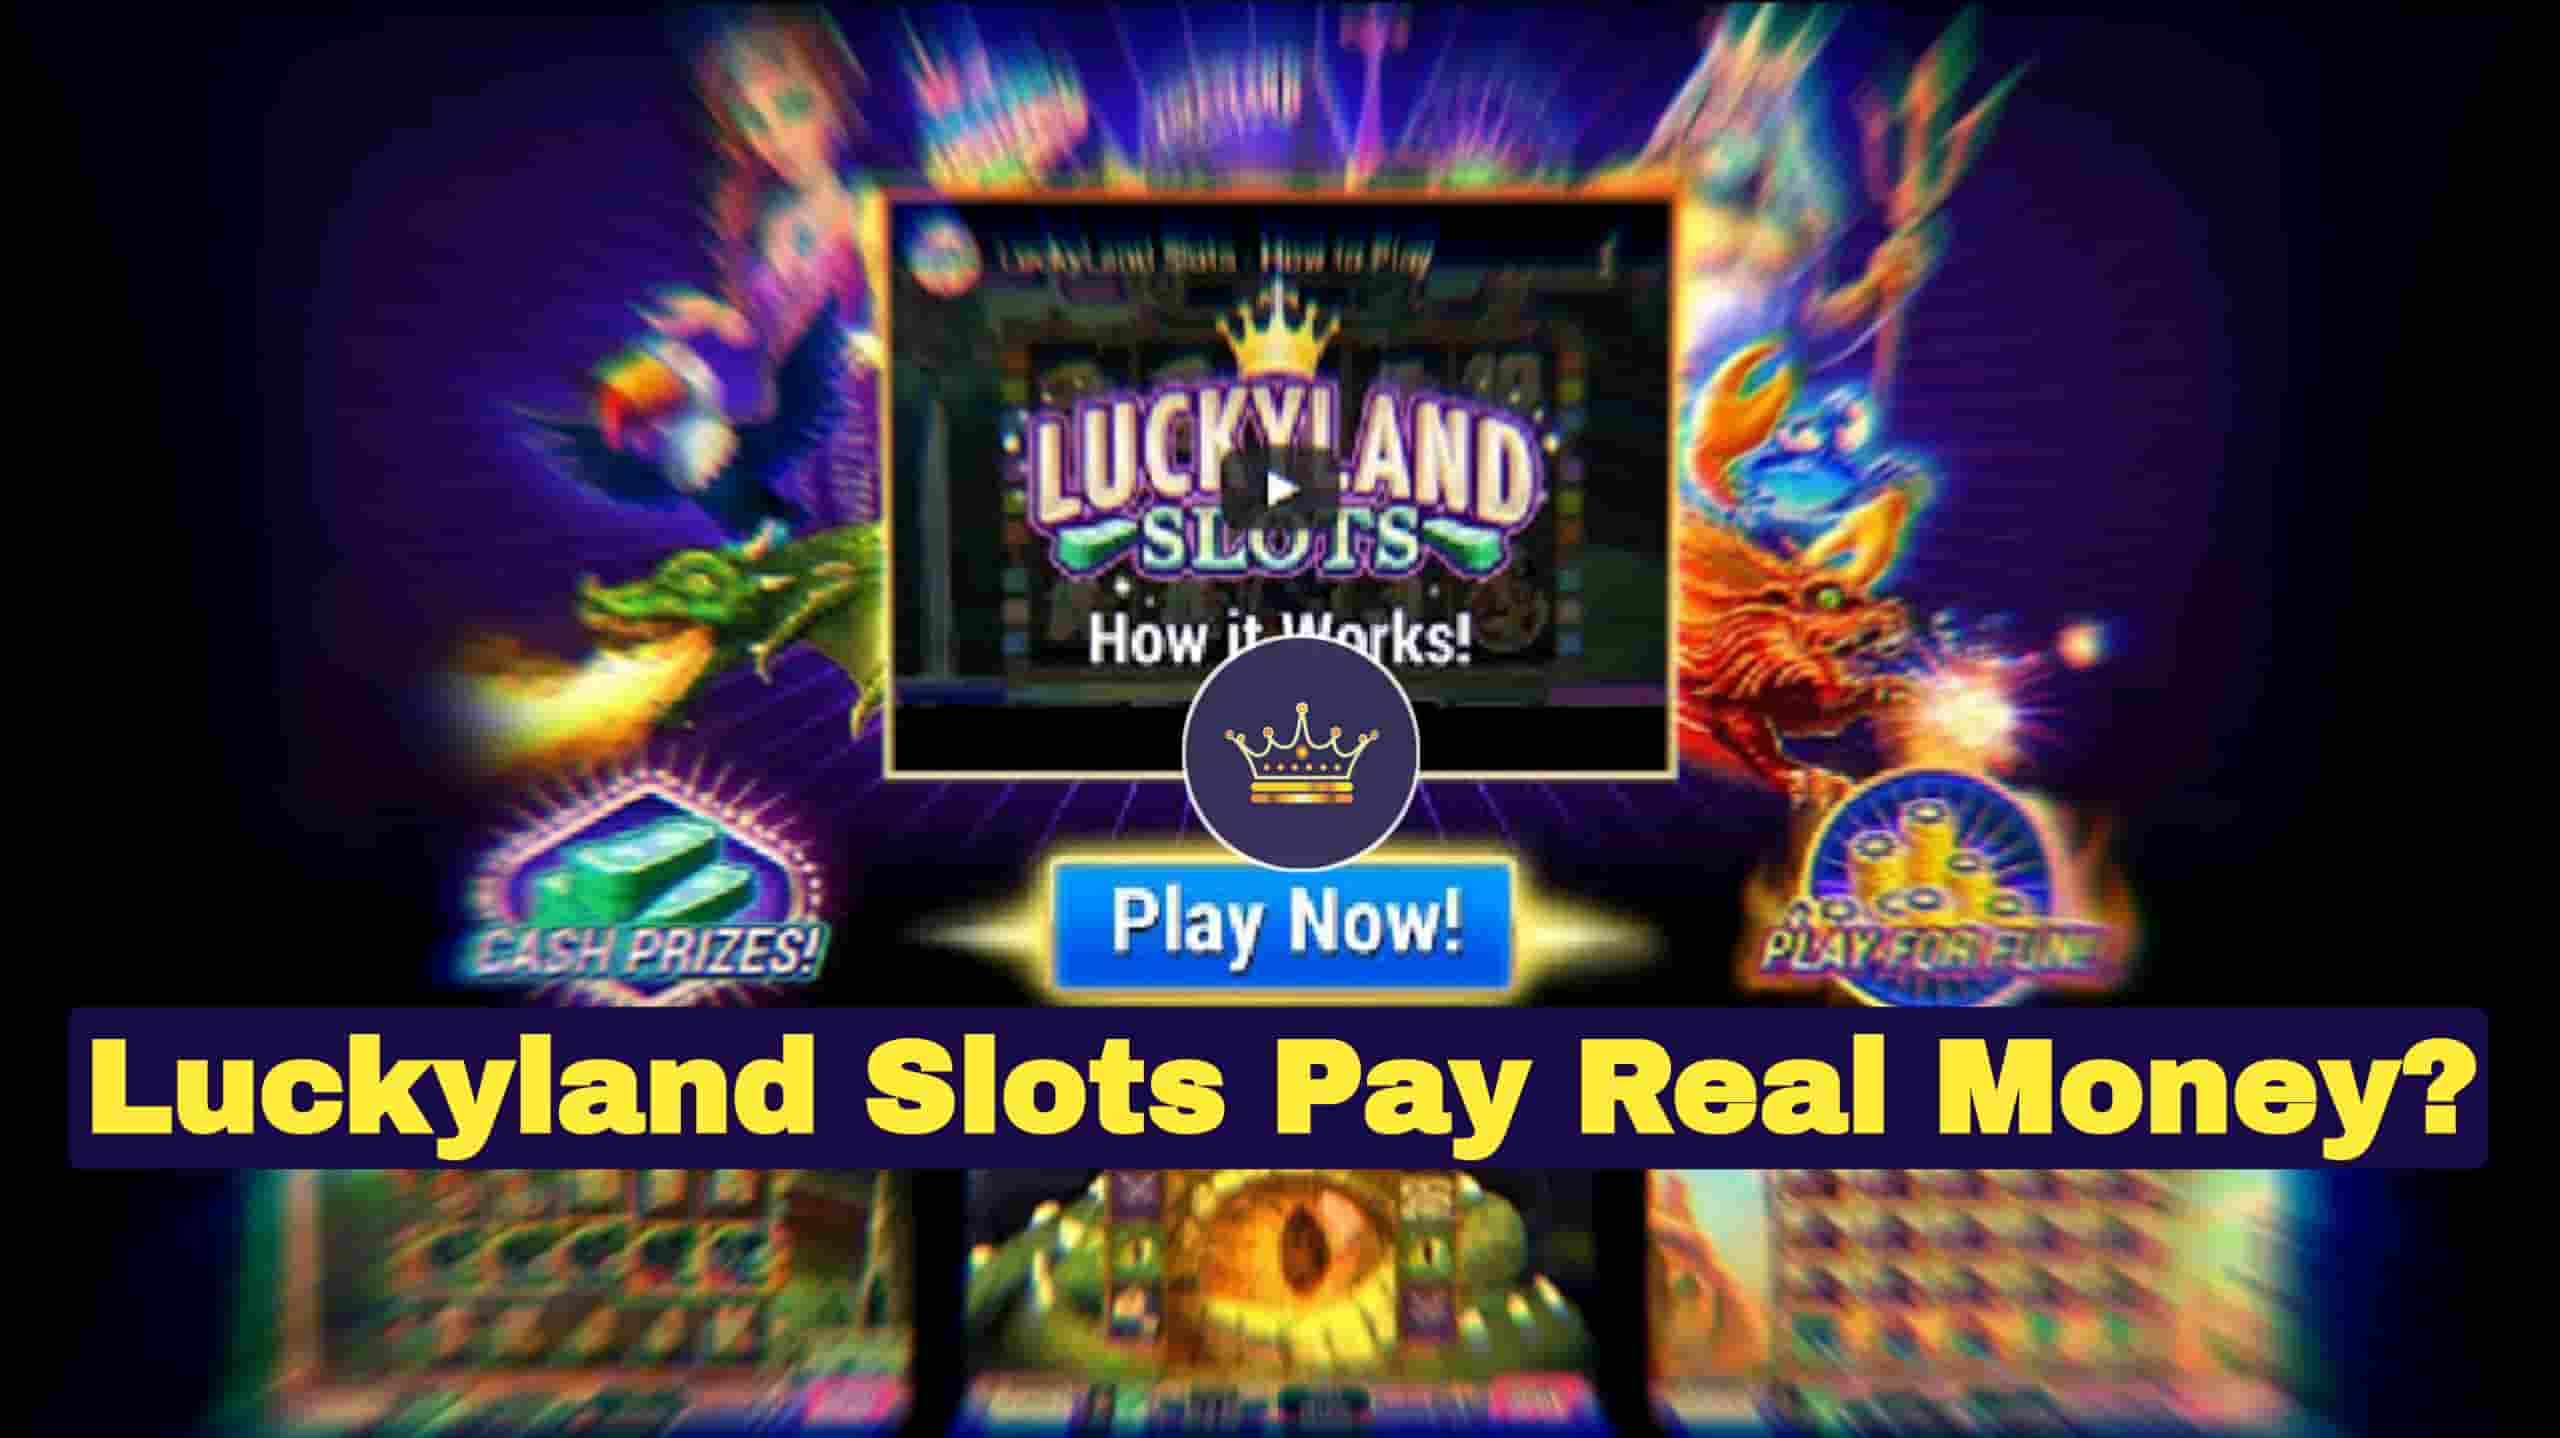 Does Luckyland Slots Pay Real Money